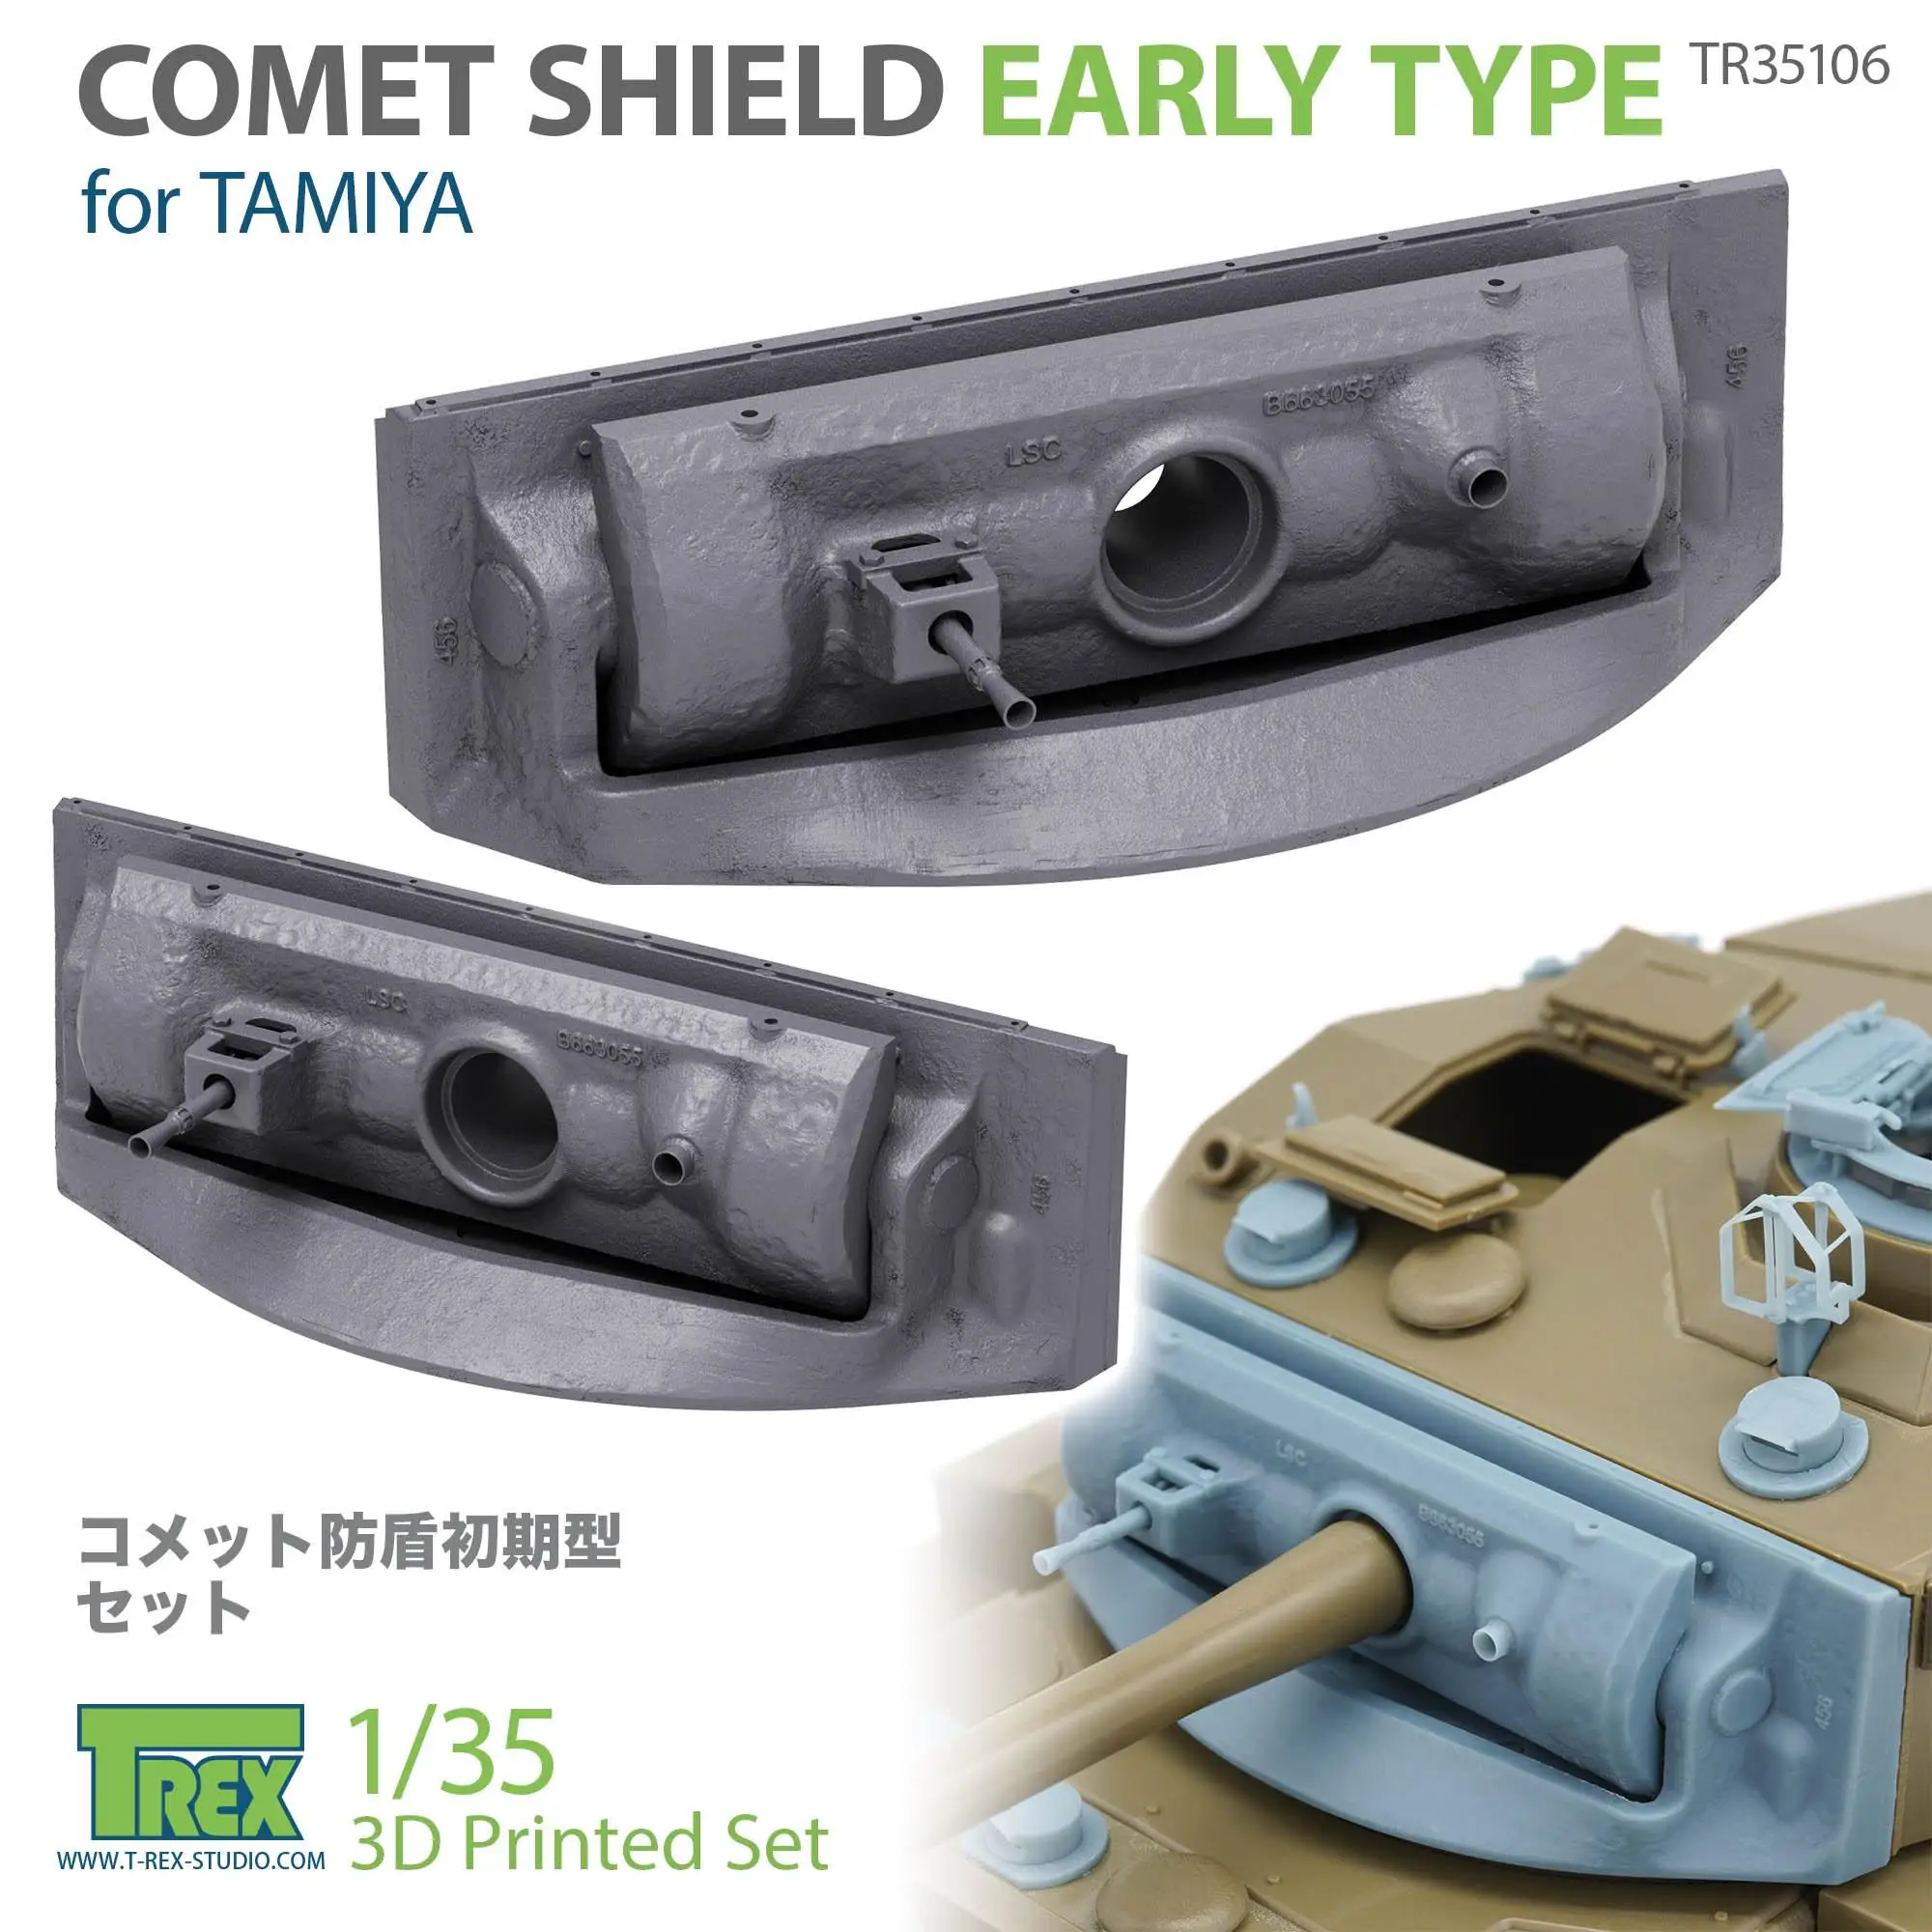 

T-REX 35106 1/35 3D Printed Comet Shield Canvas Cover Late Type fComet Shield Early Type for TAMIYA